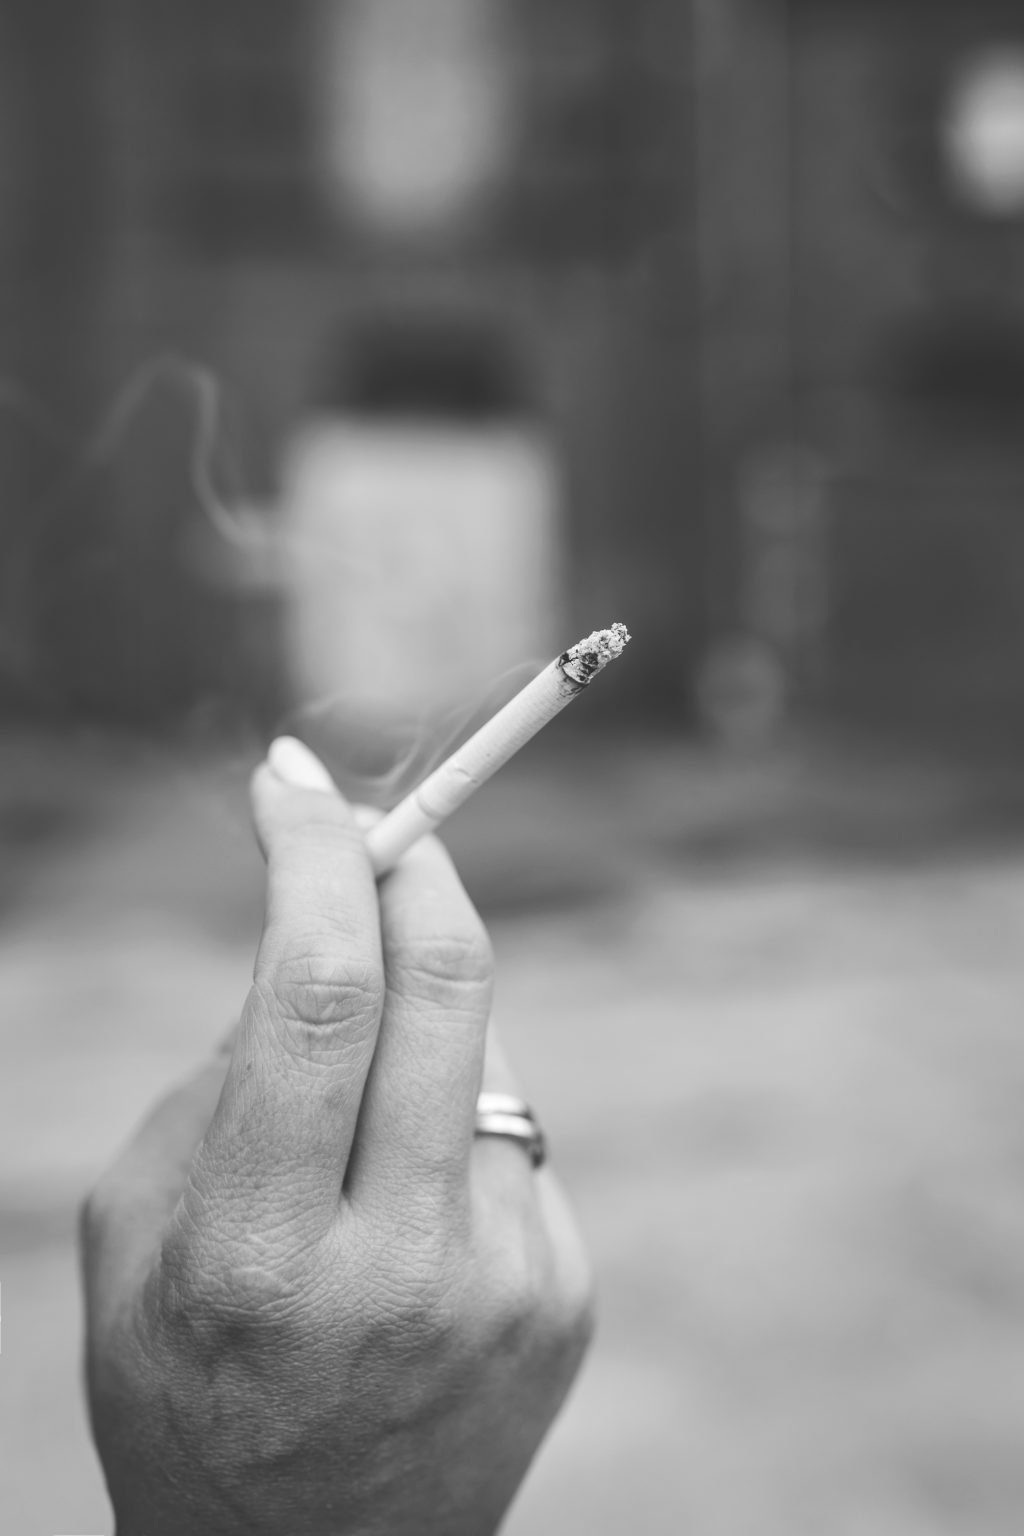 Hand holding a cigarette - free stock photo